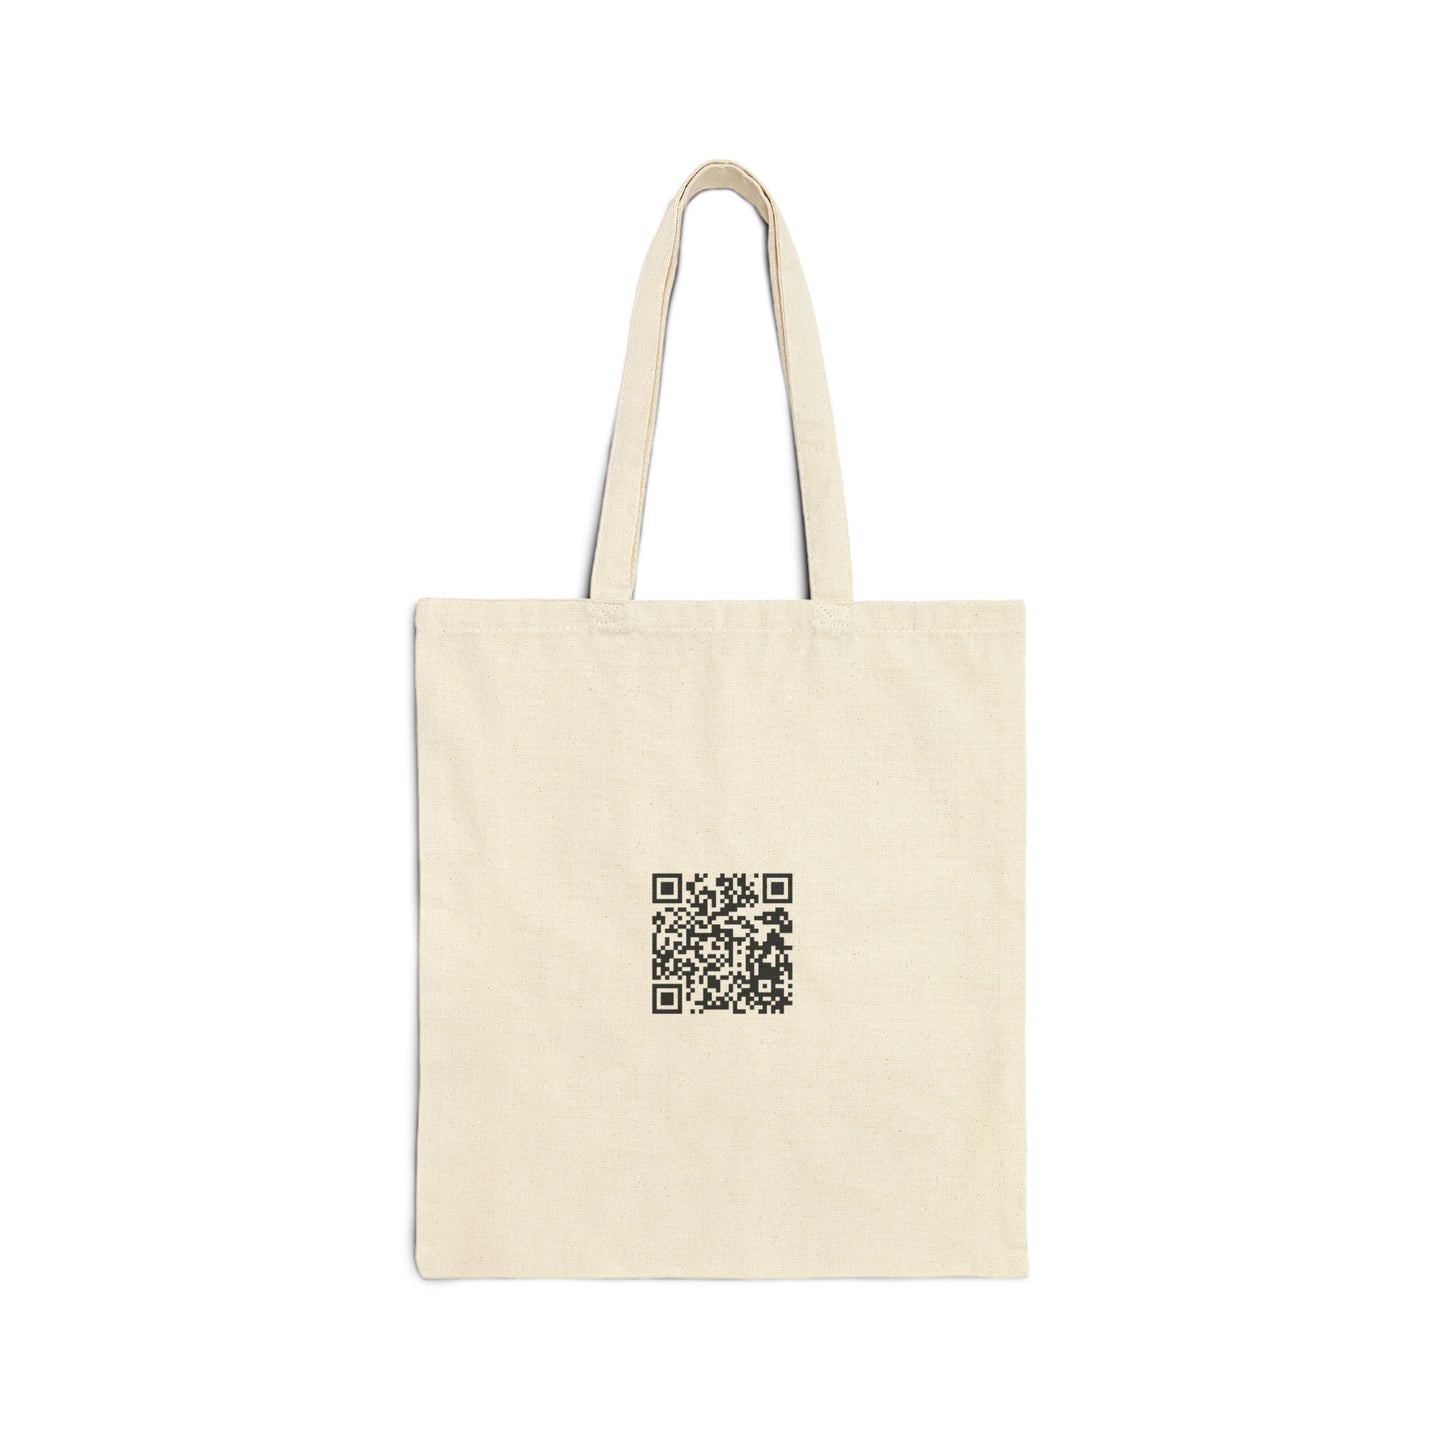 Before The Boy - Cotton Canvas Tote Bag